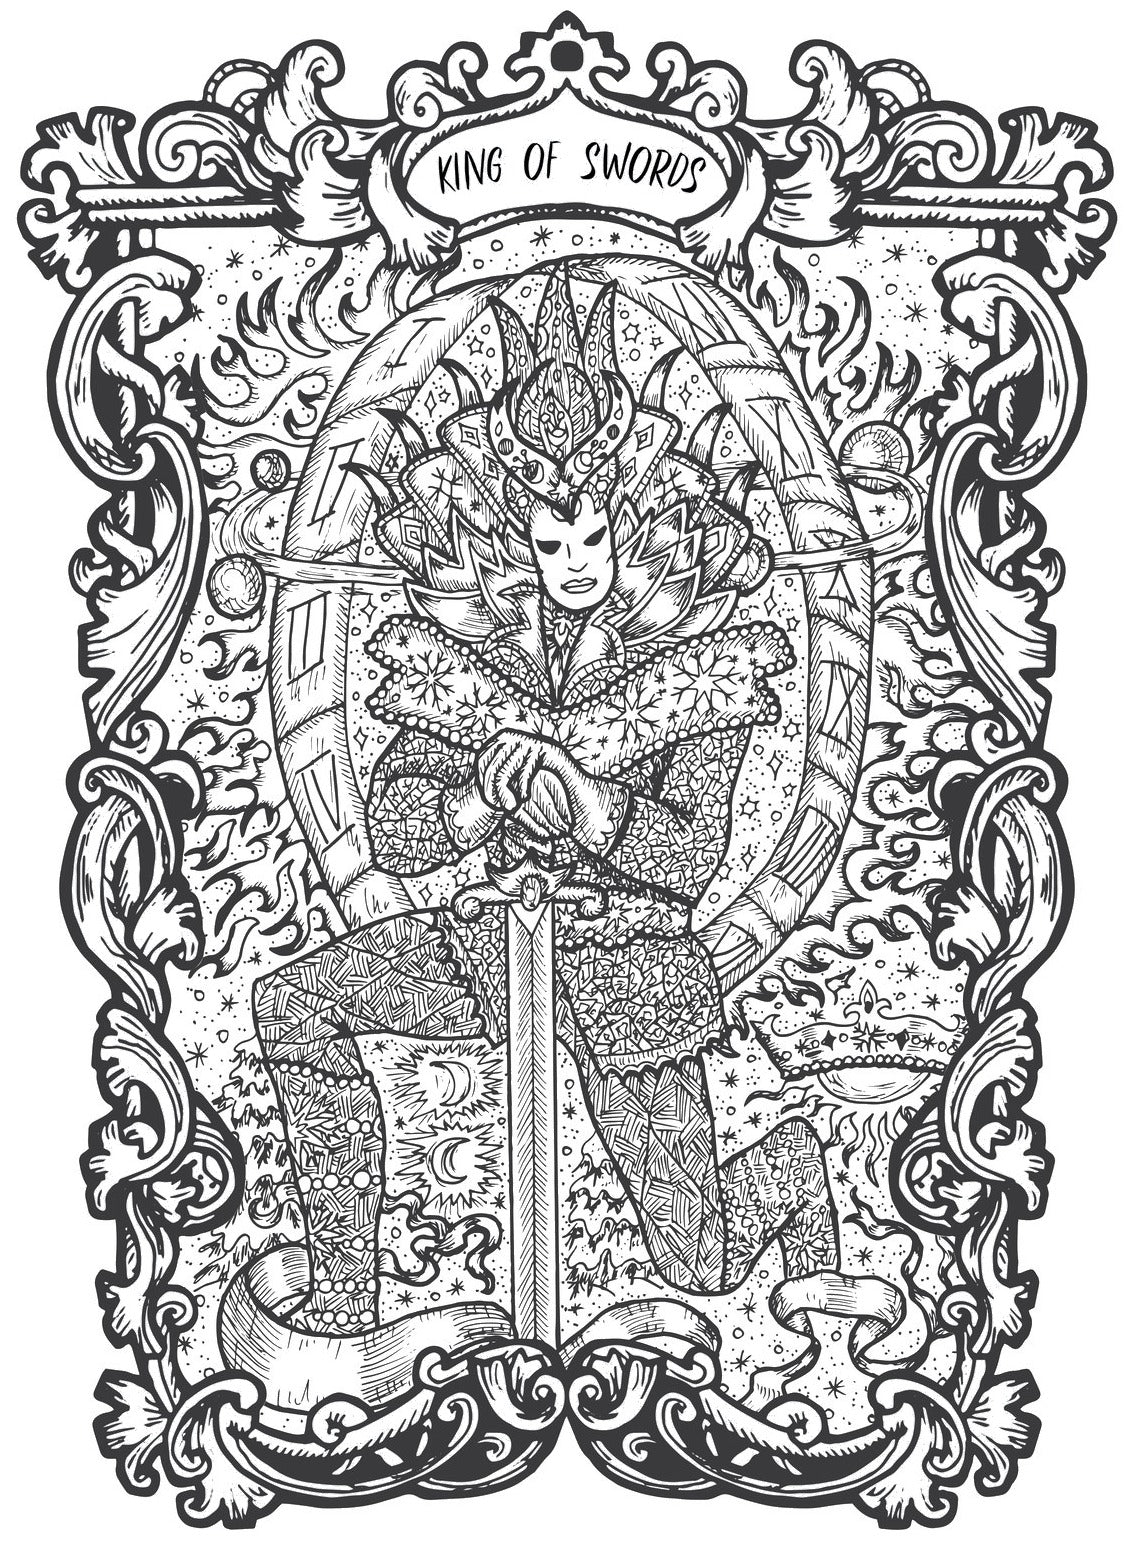 Cards of Fortune - Tarot Art Fantasy, Gothic Occult Figures Coloring Book